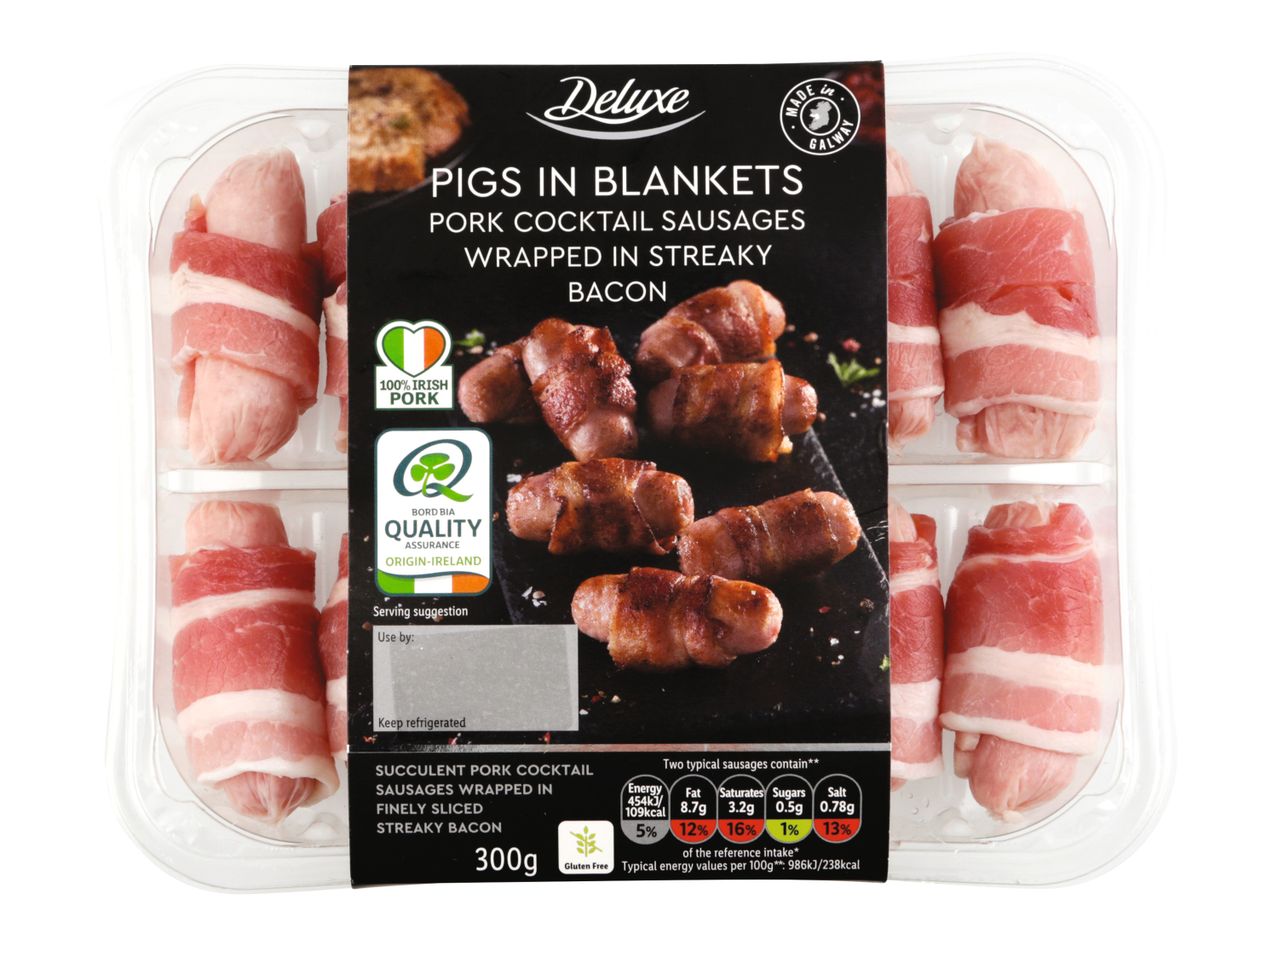 Go to full screen view: Pigs in Blankets - Image 1